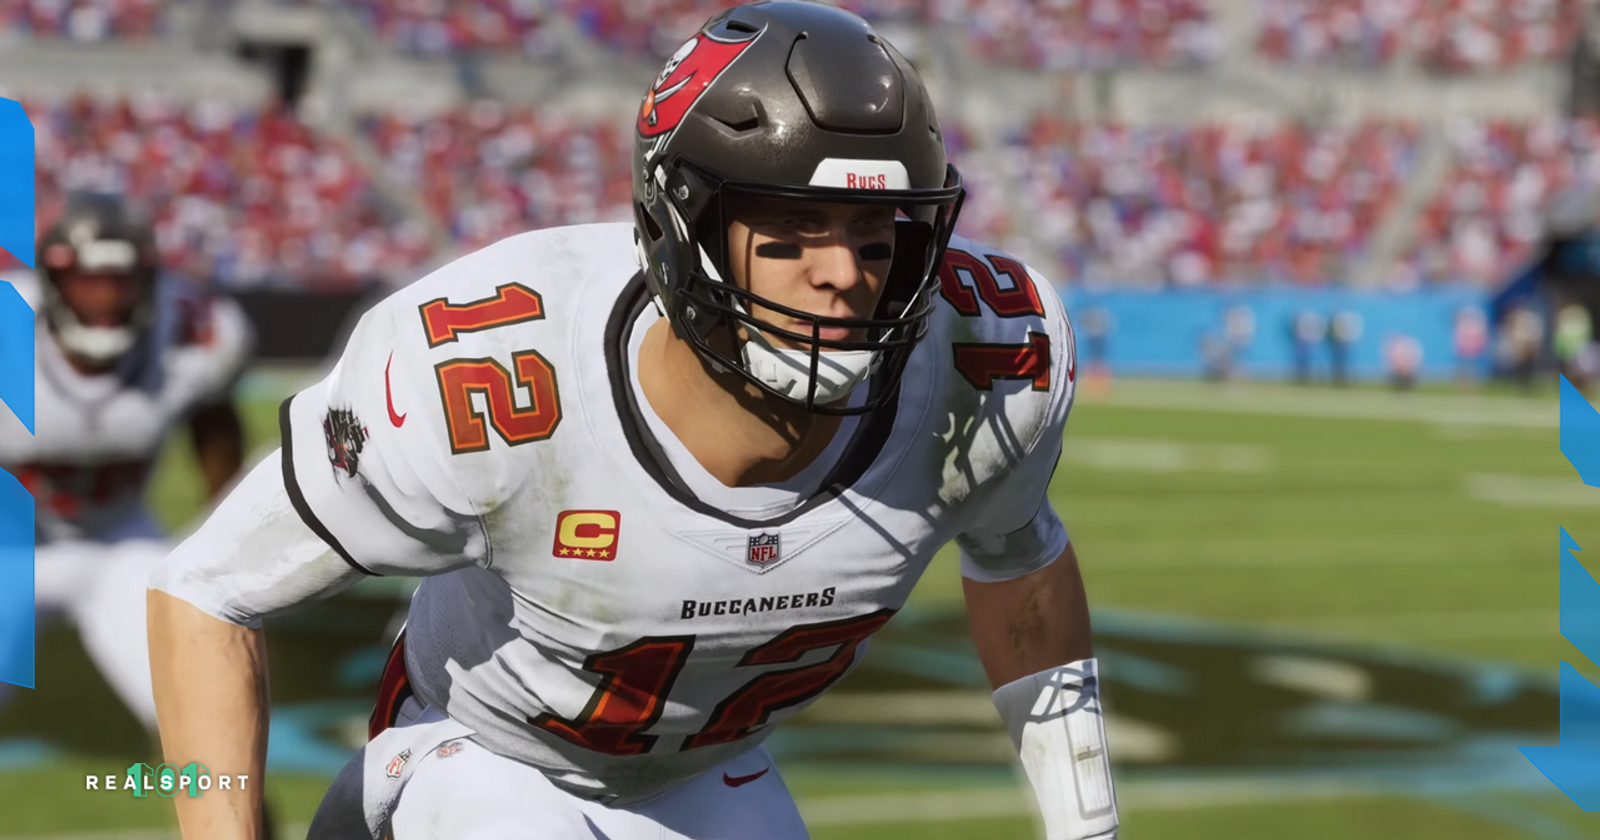 Madden 23 advanced controls guide – how to slide, dive, and more